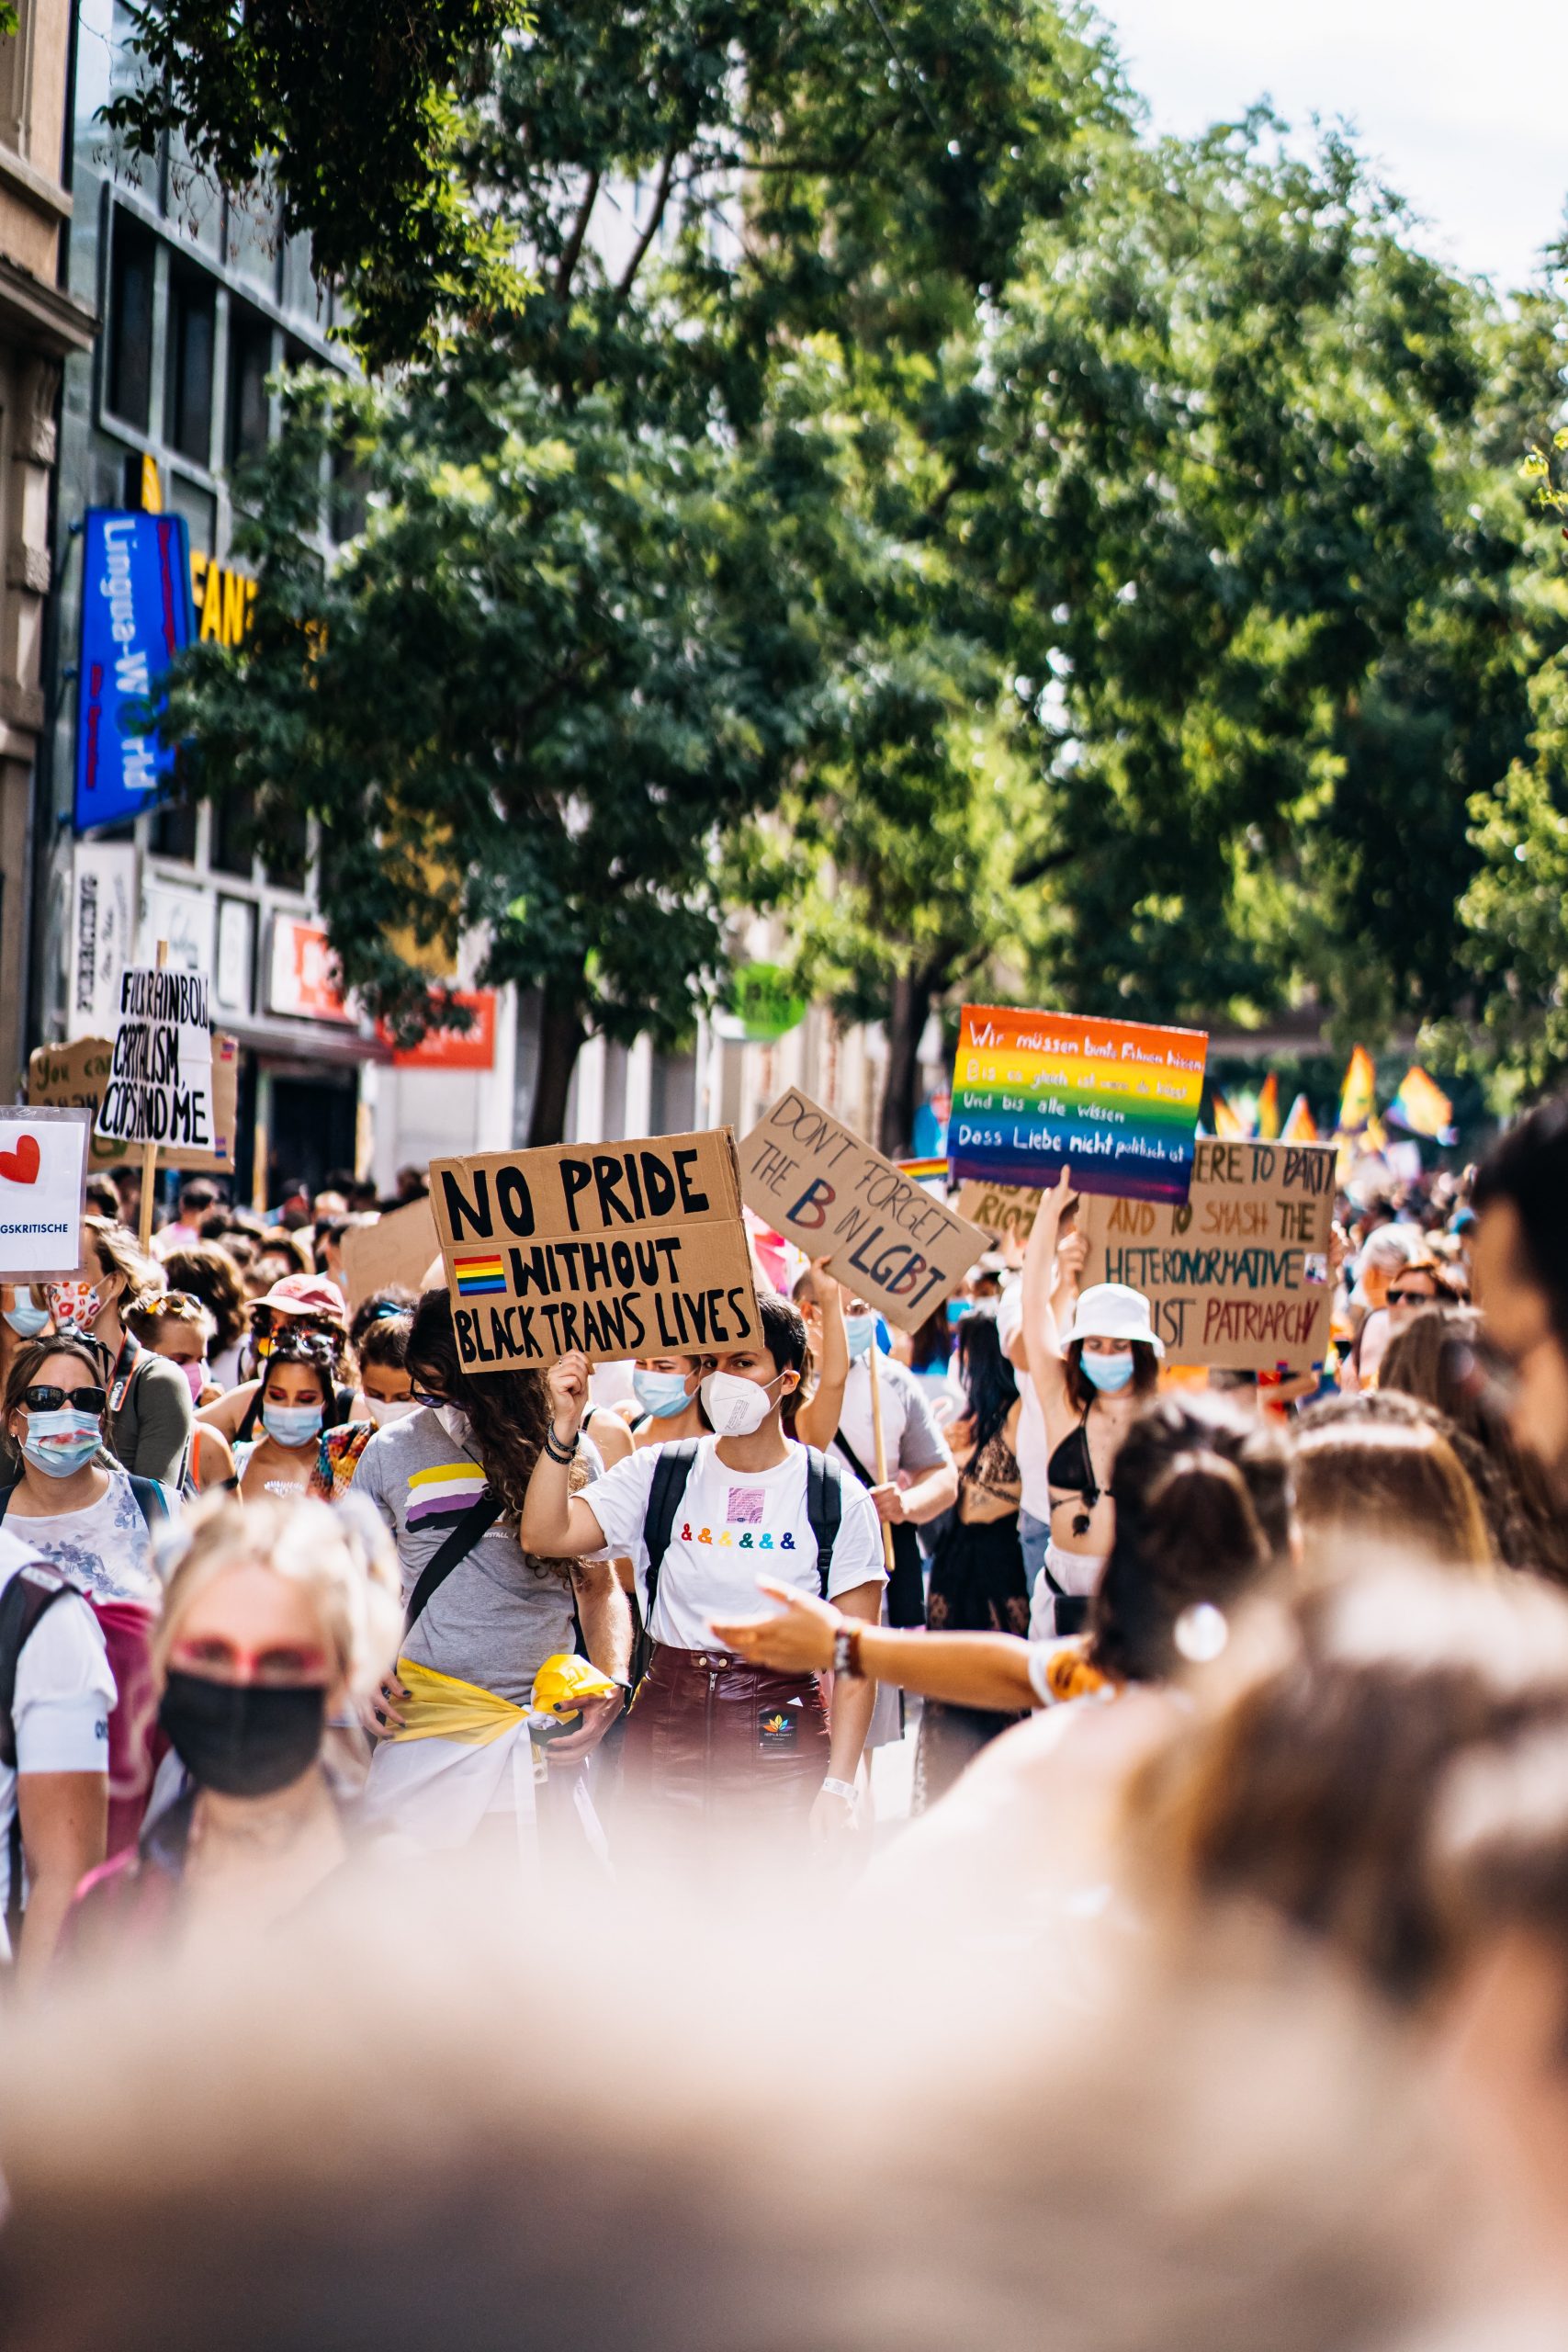 A protest rally for trans rights in London